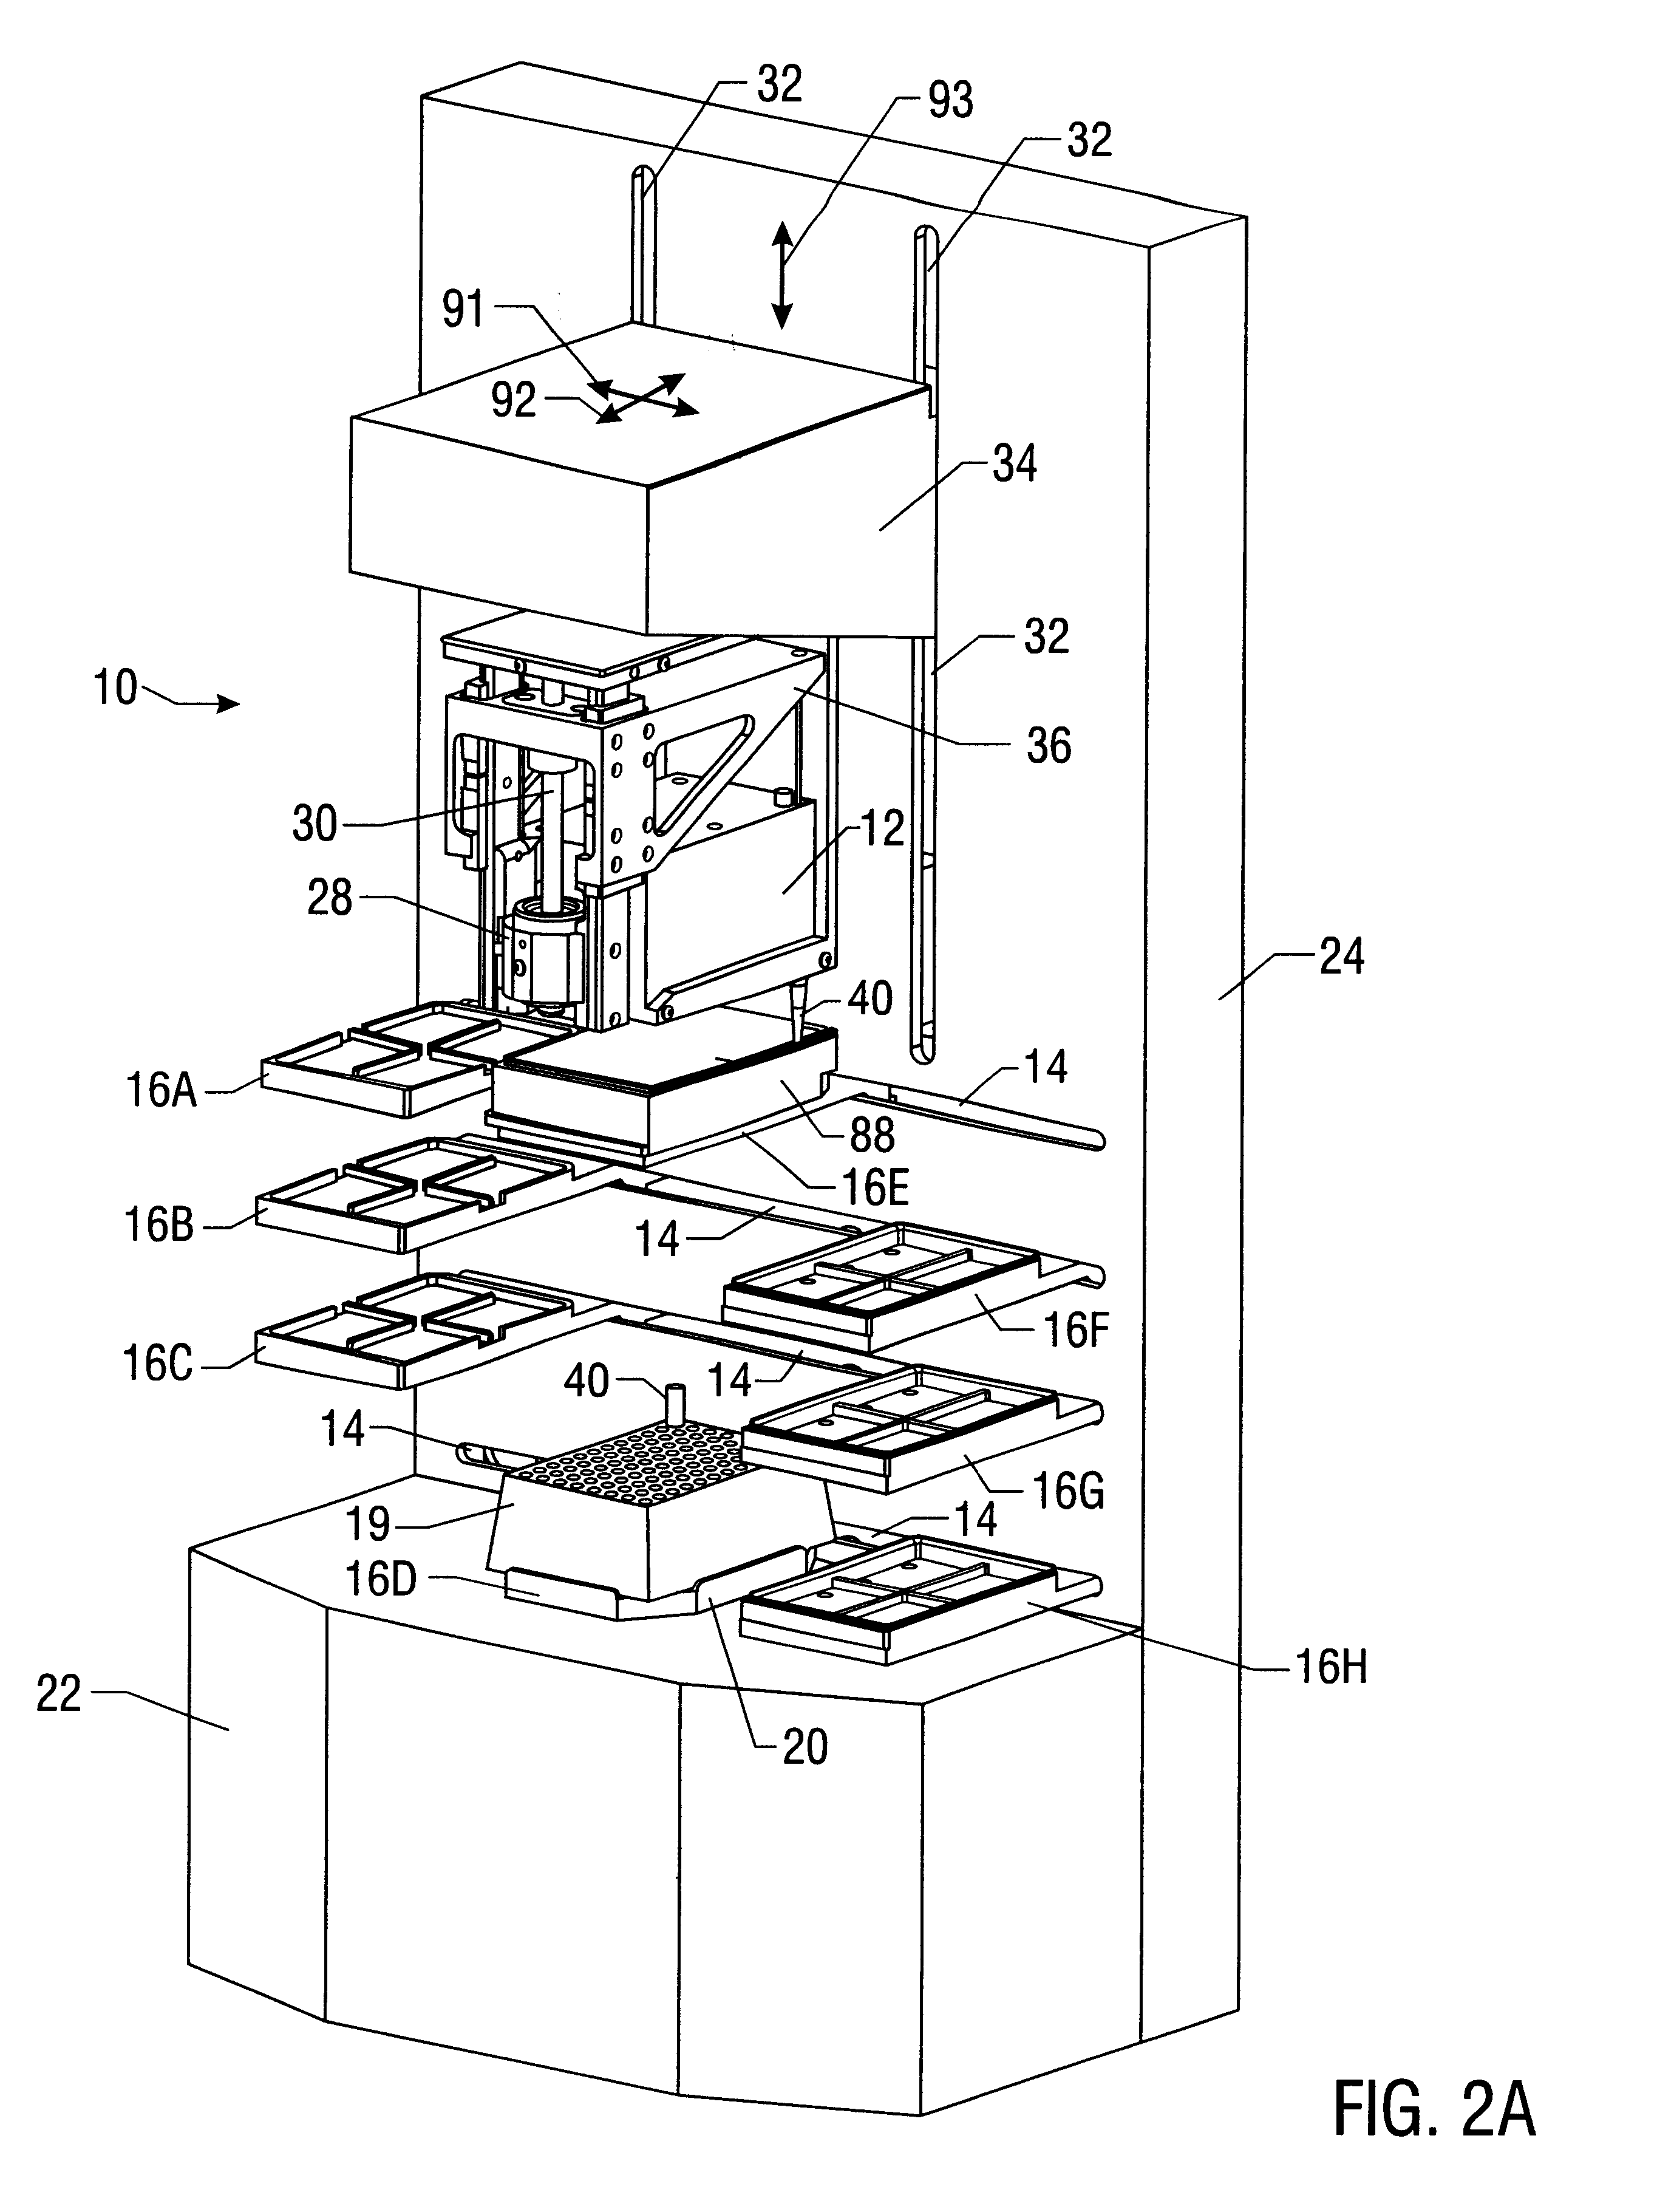 Pipetting station apparatus